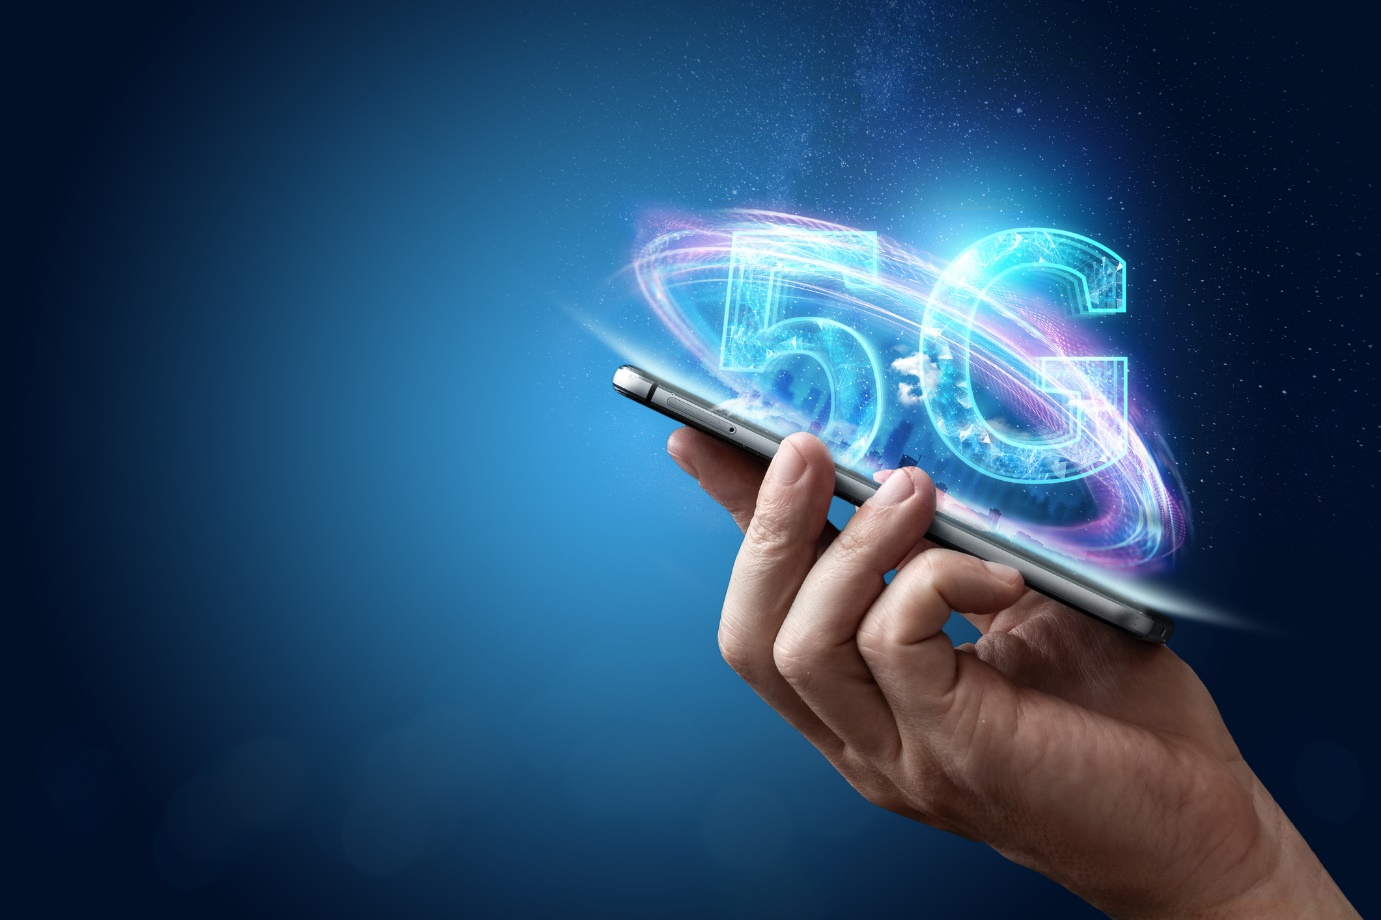 5g on mobile